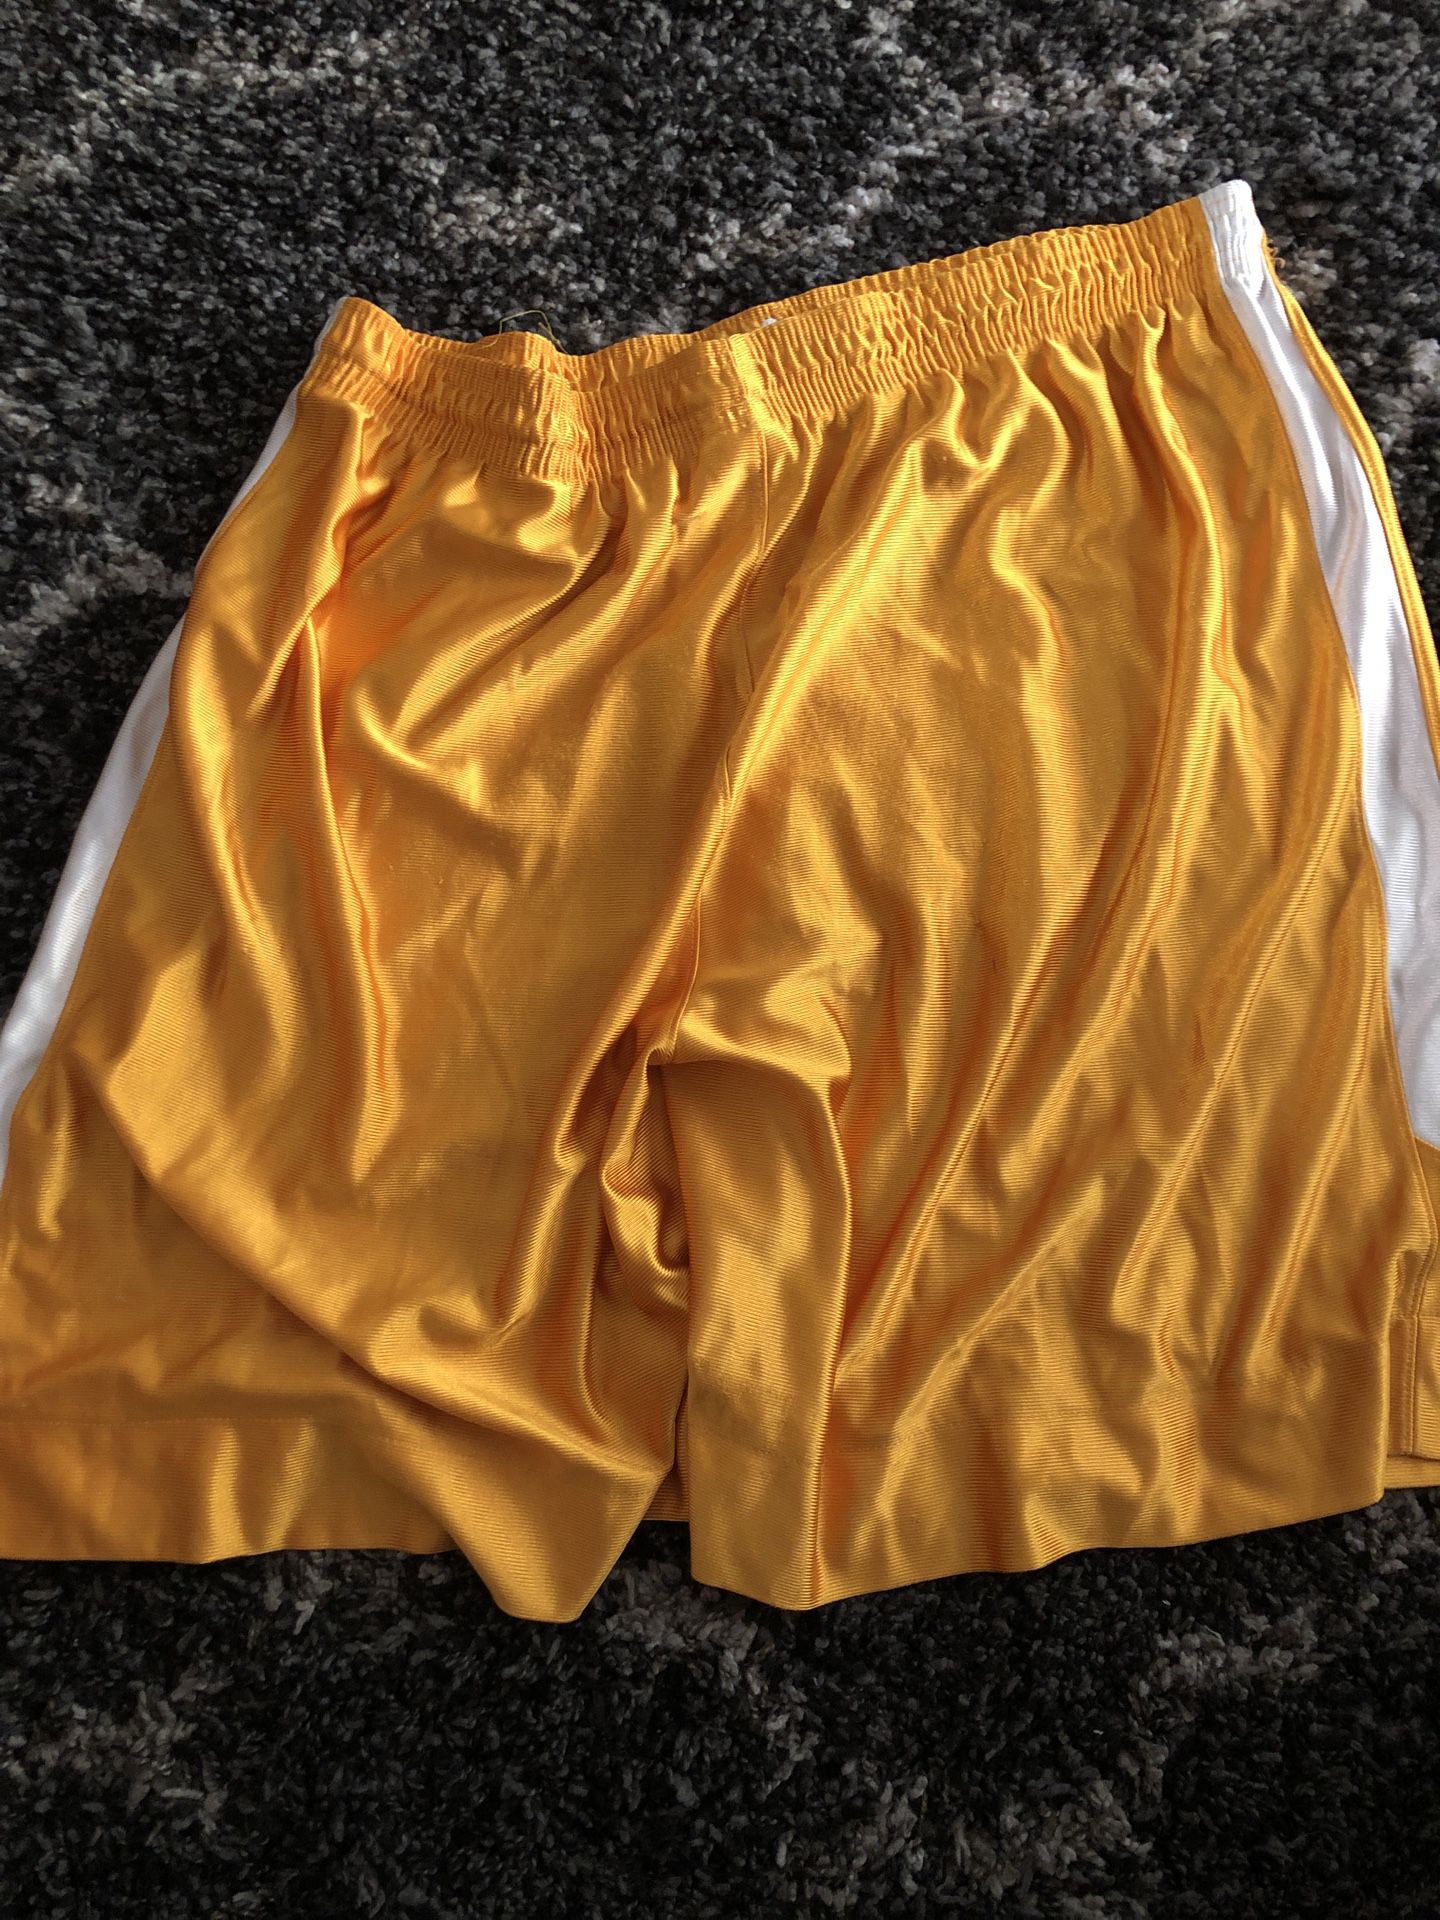 Nike Los Angeles Lakers Retro Basketball Shorts Black/Gold Size Large Mens  for Sale in Temecula, CA - OfferUp